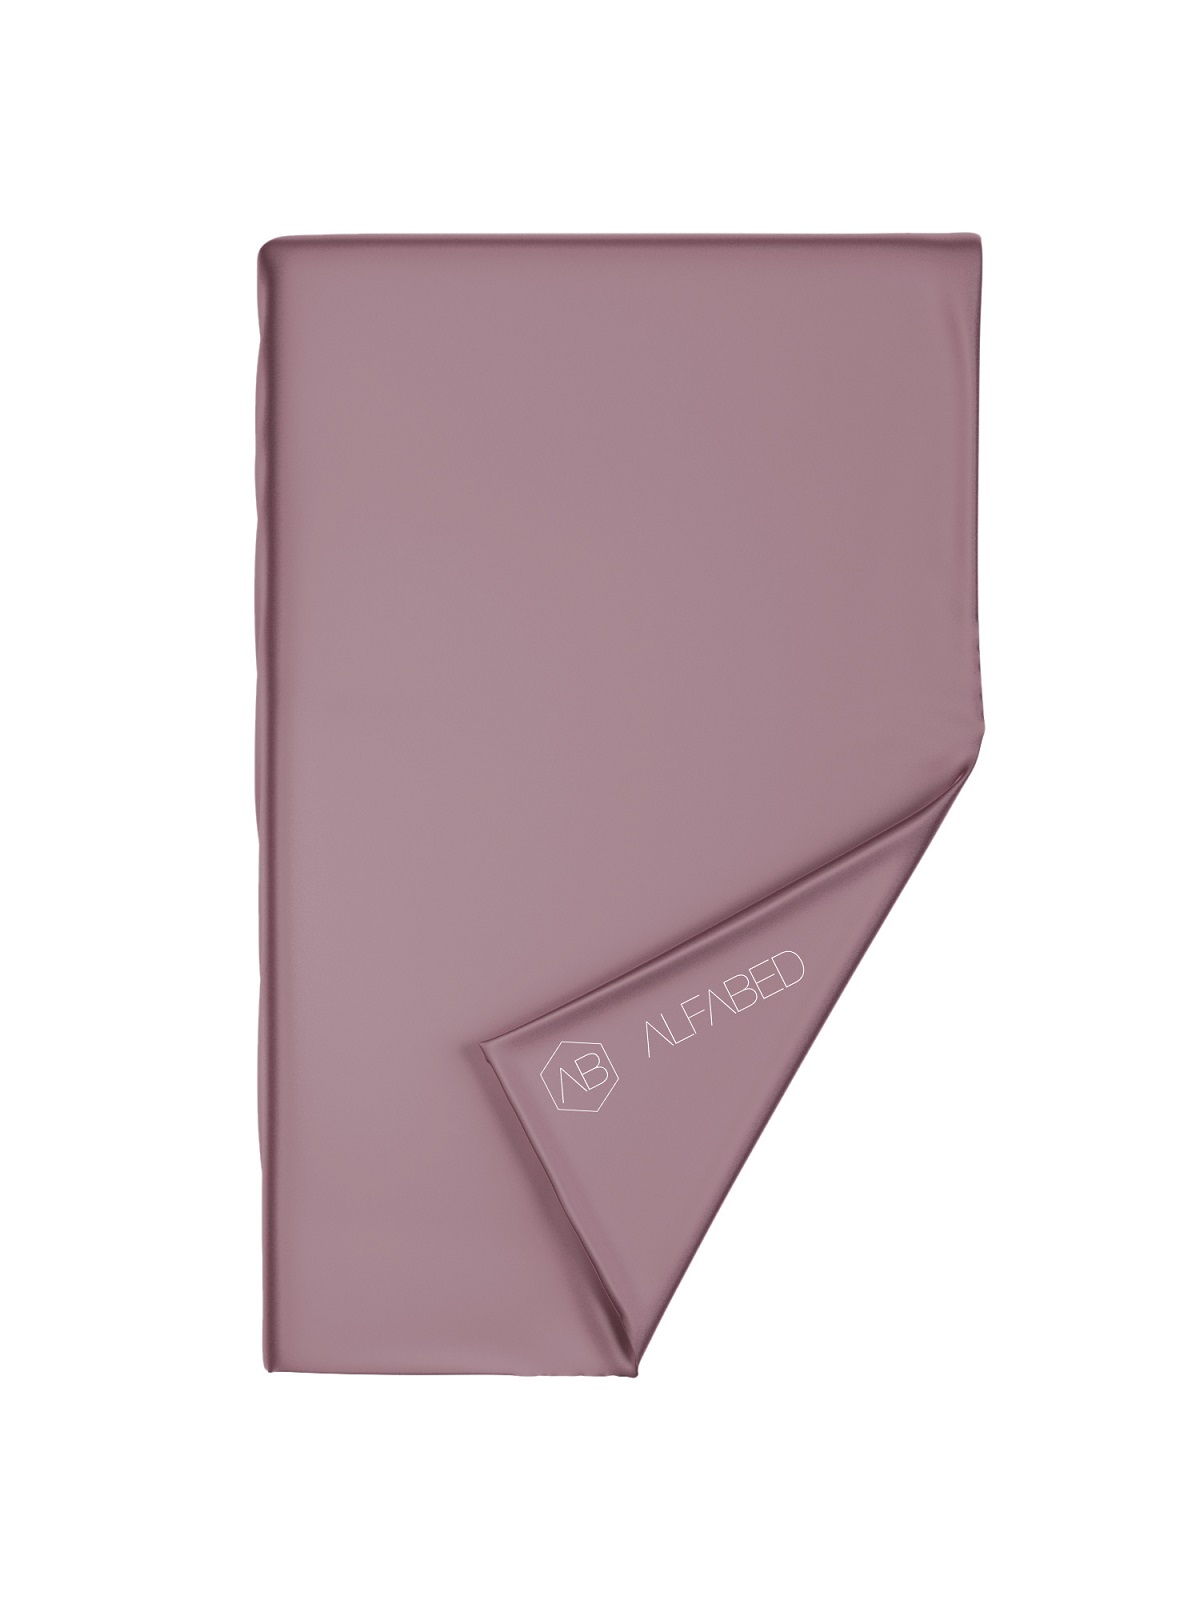 Topper Sheet-Case Royal Cotton Sateen Taupe H-151